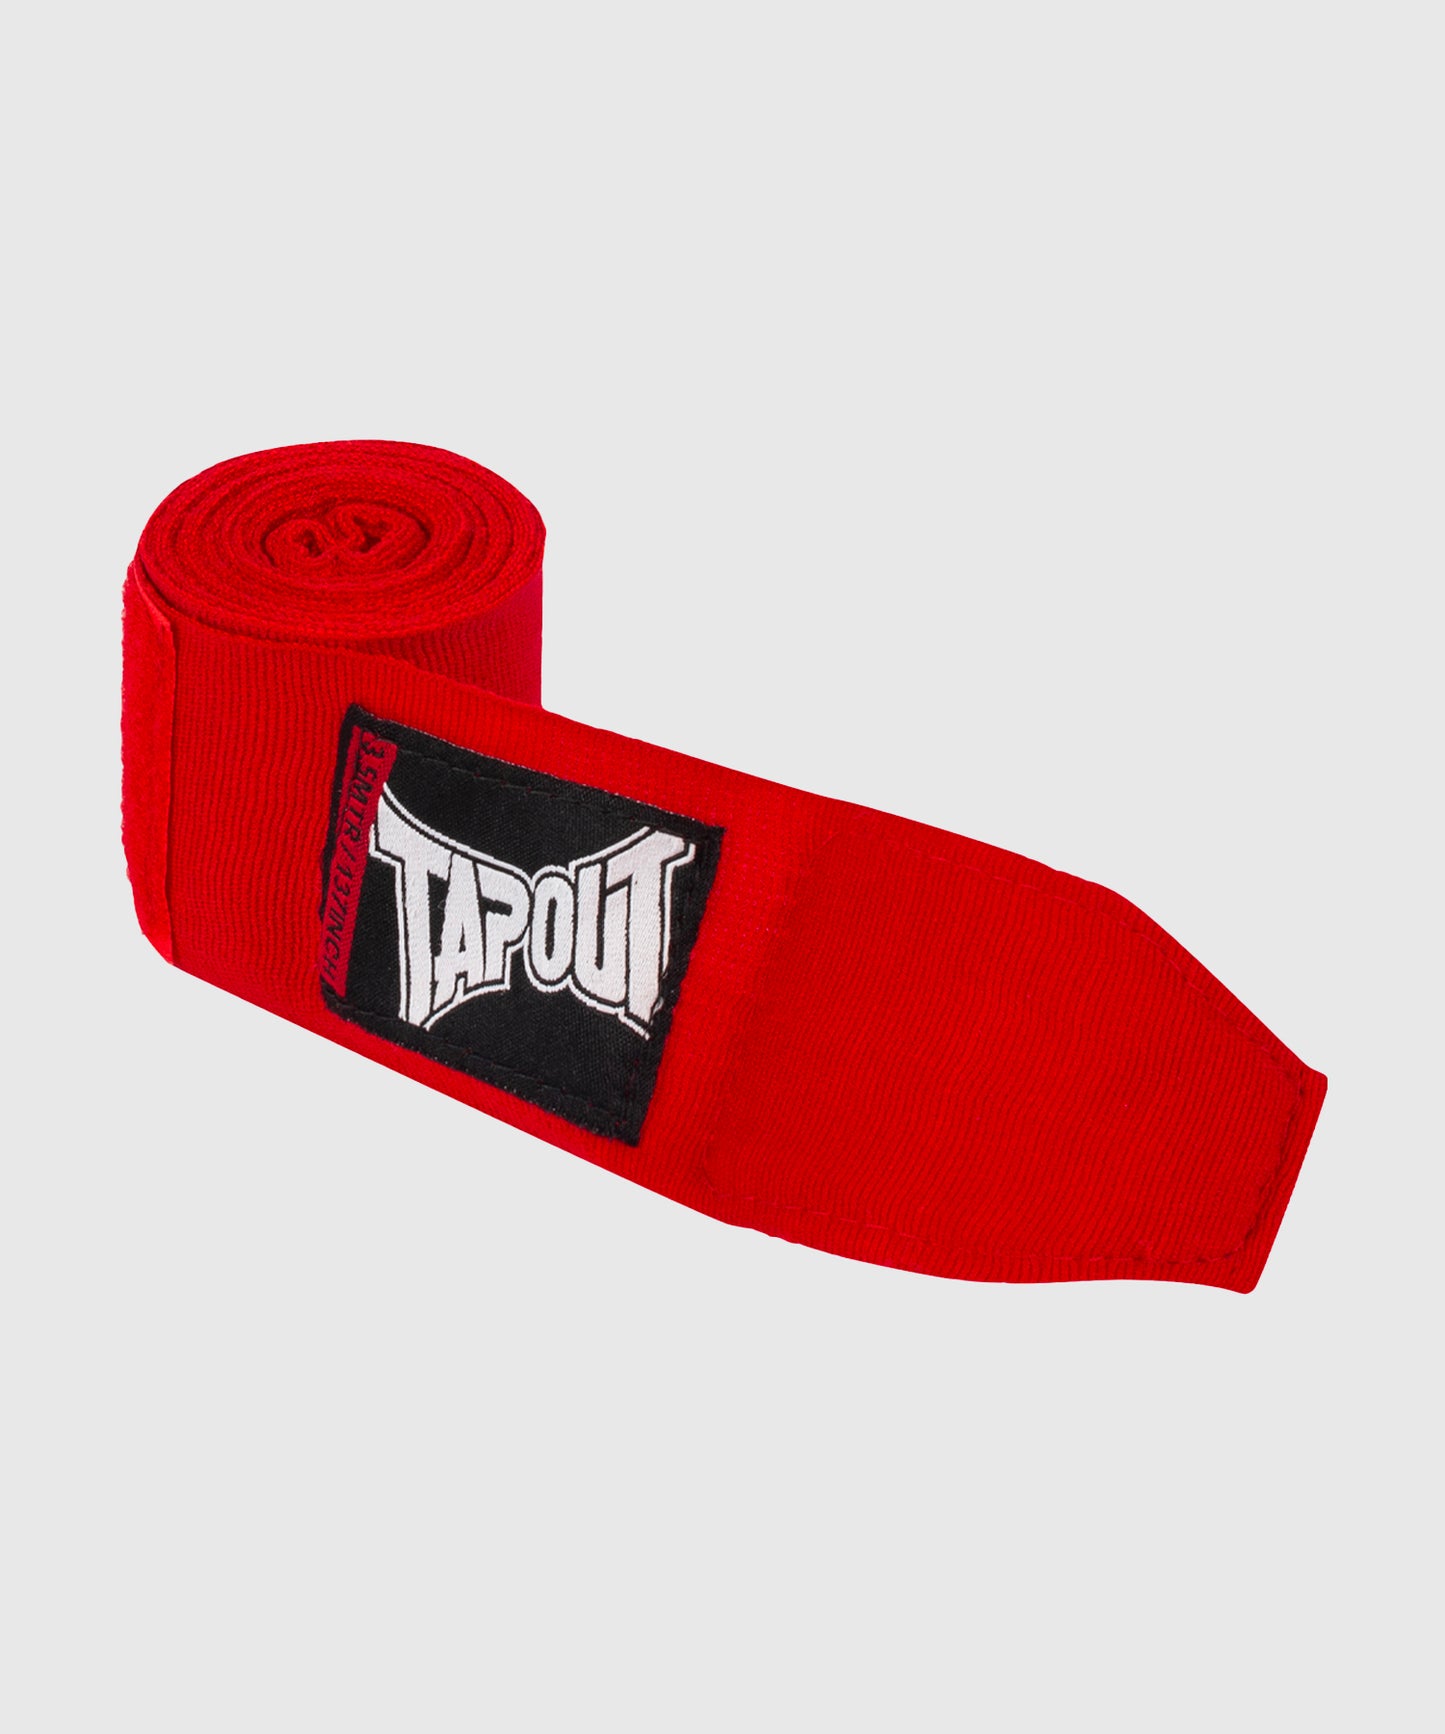 Tapout Sling Bänder - 3.5m - Rot